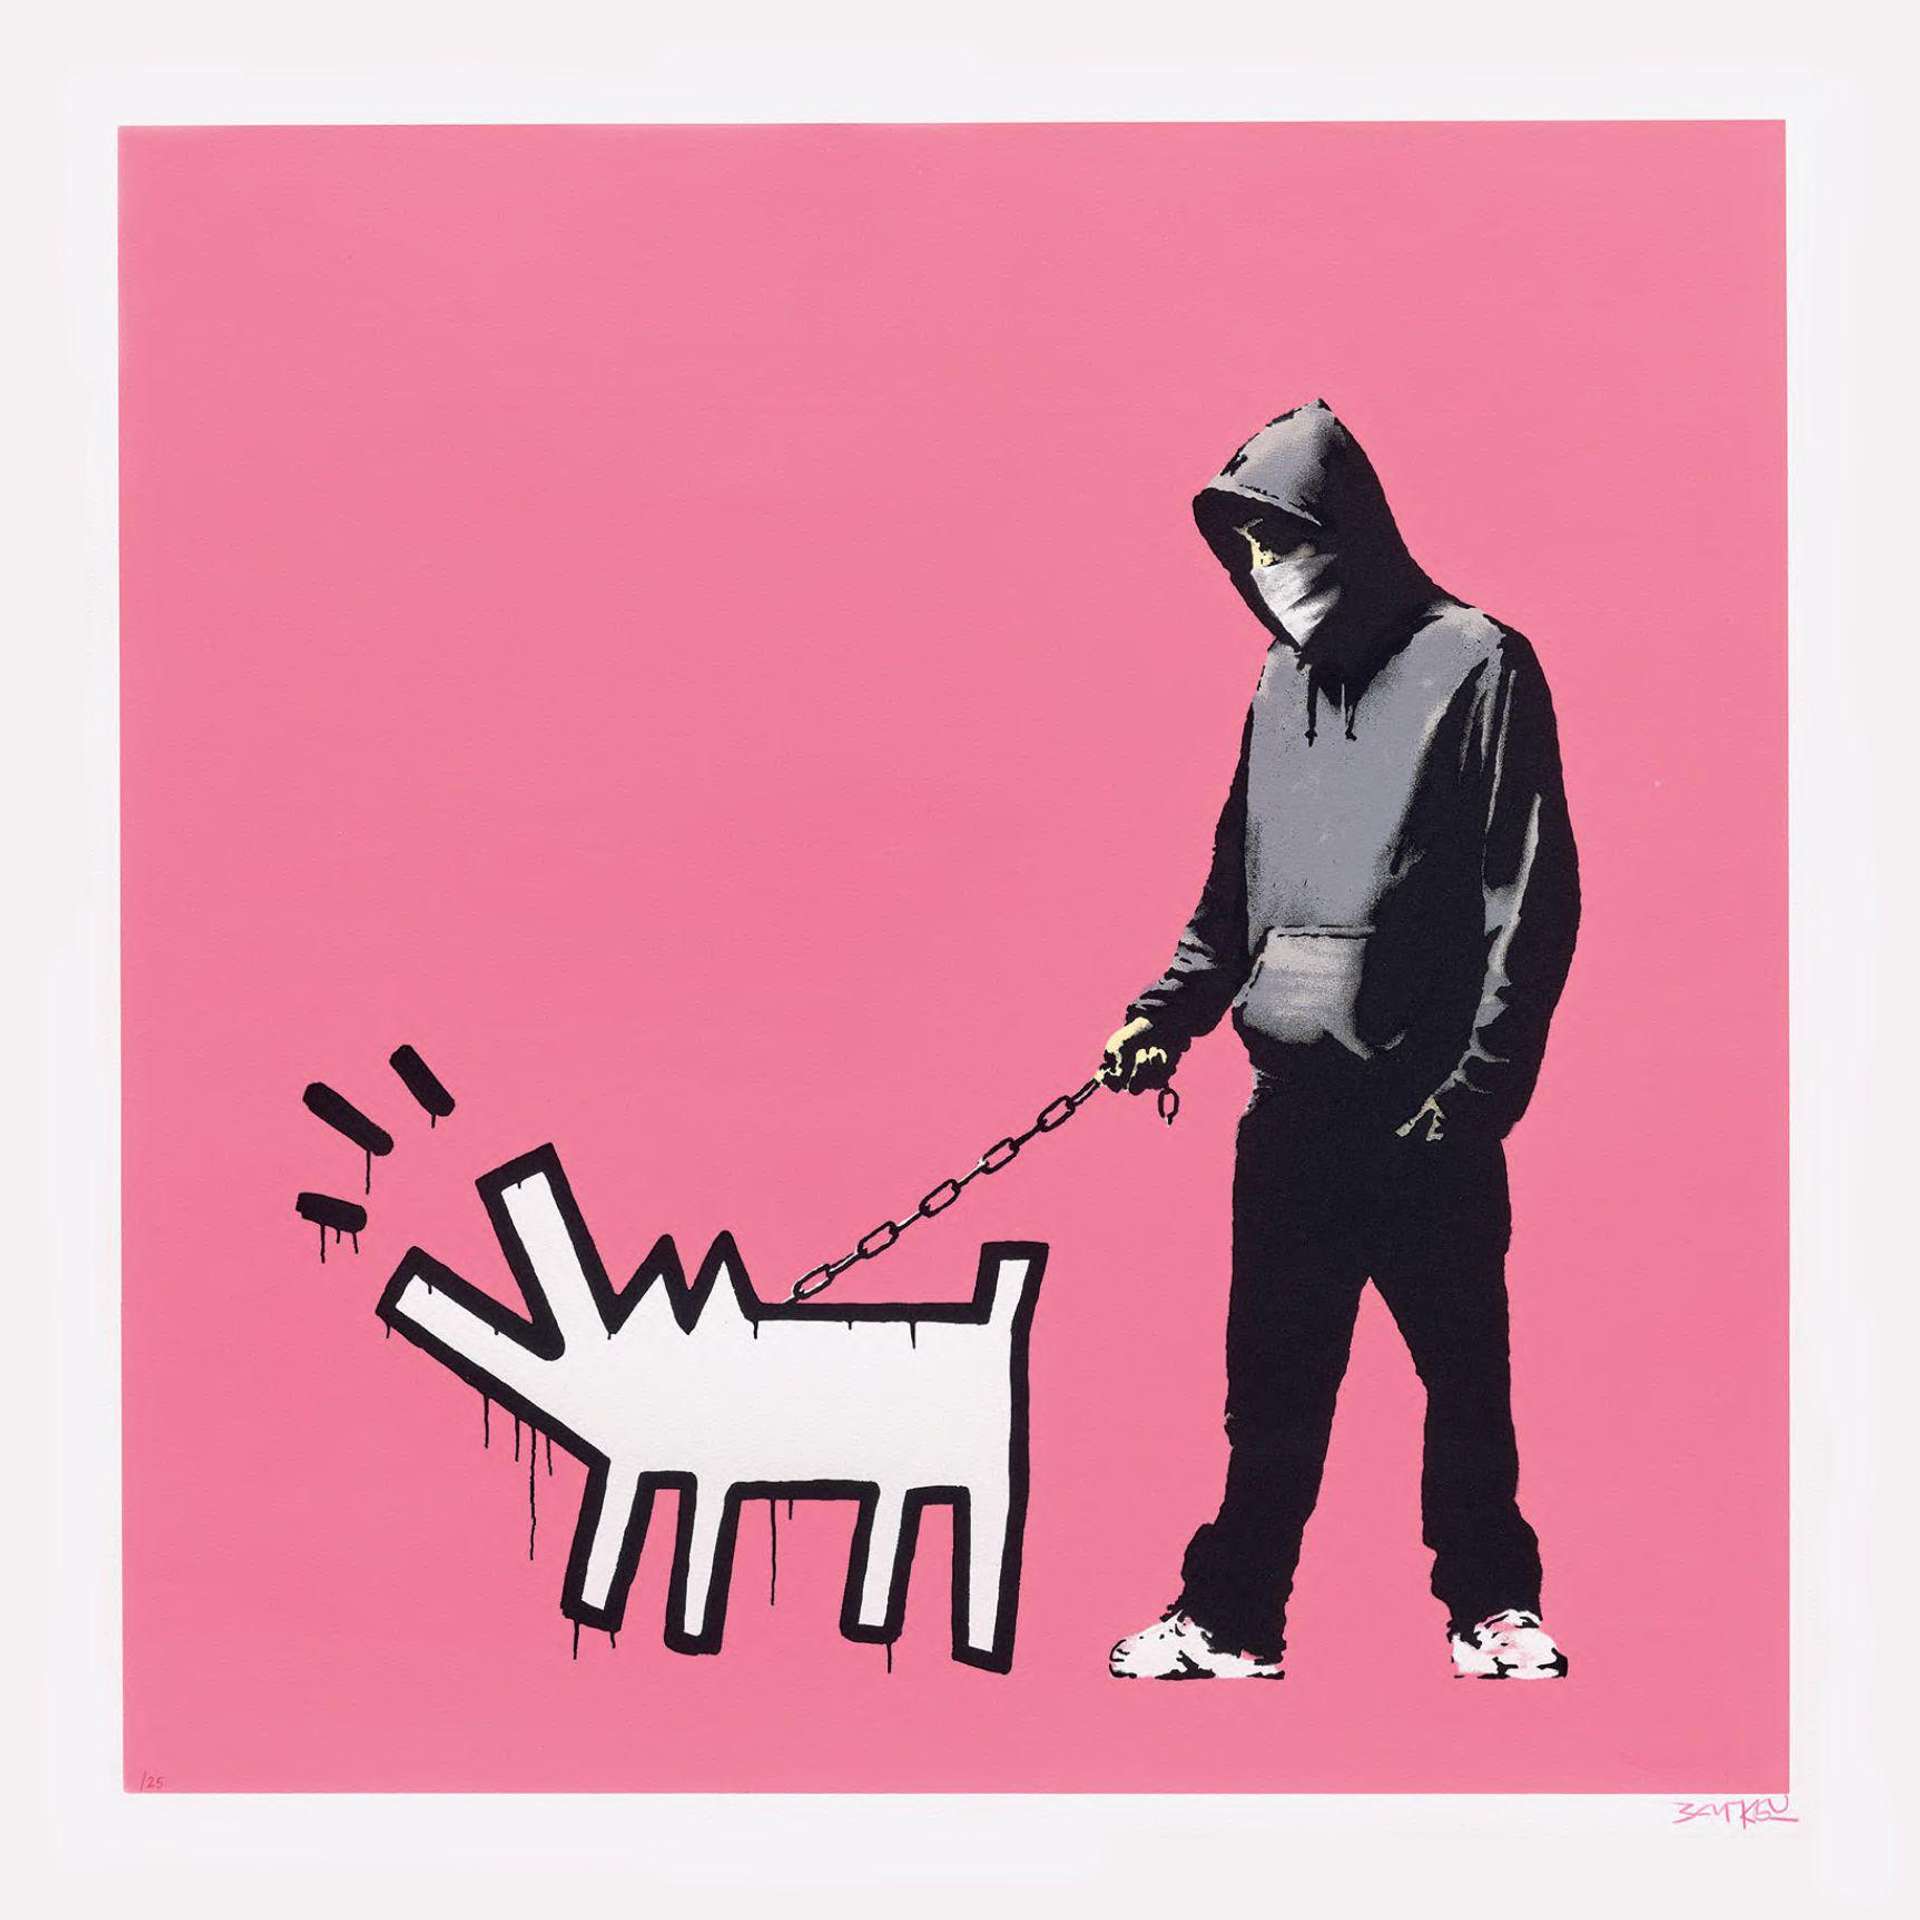 A screenprint by Banksy depicting a hooded figure holding the lead of a dog modelled after Keith Haring's Barking Dog, set against a bright pink background.